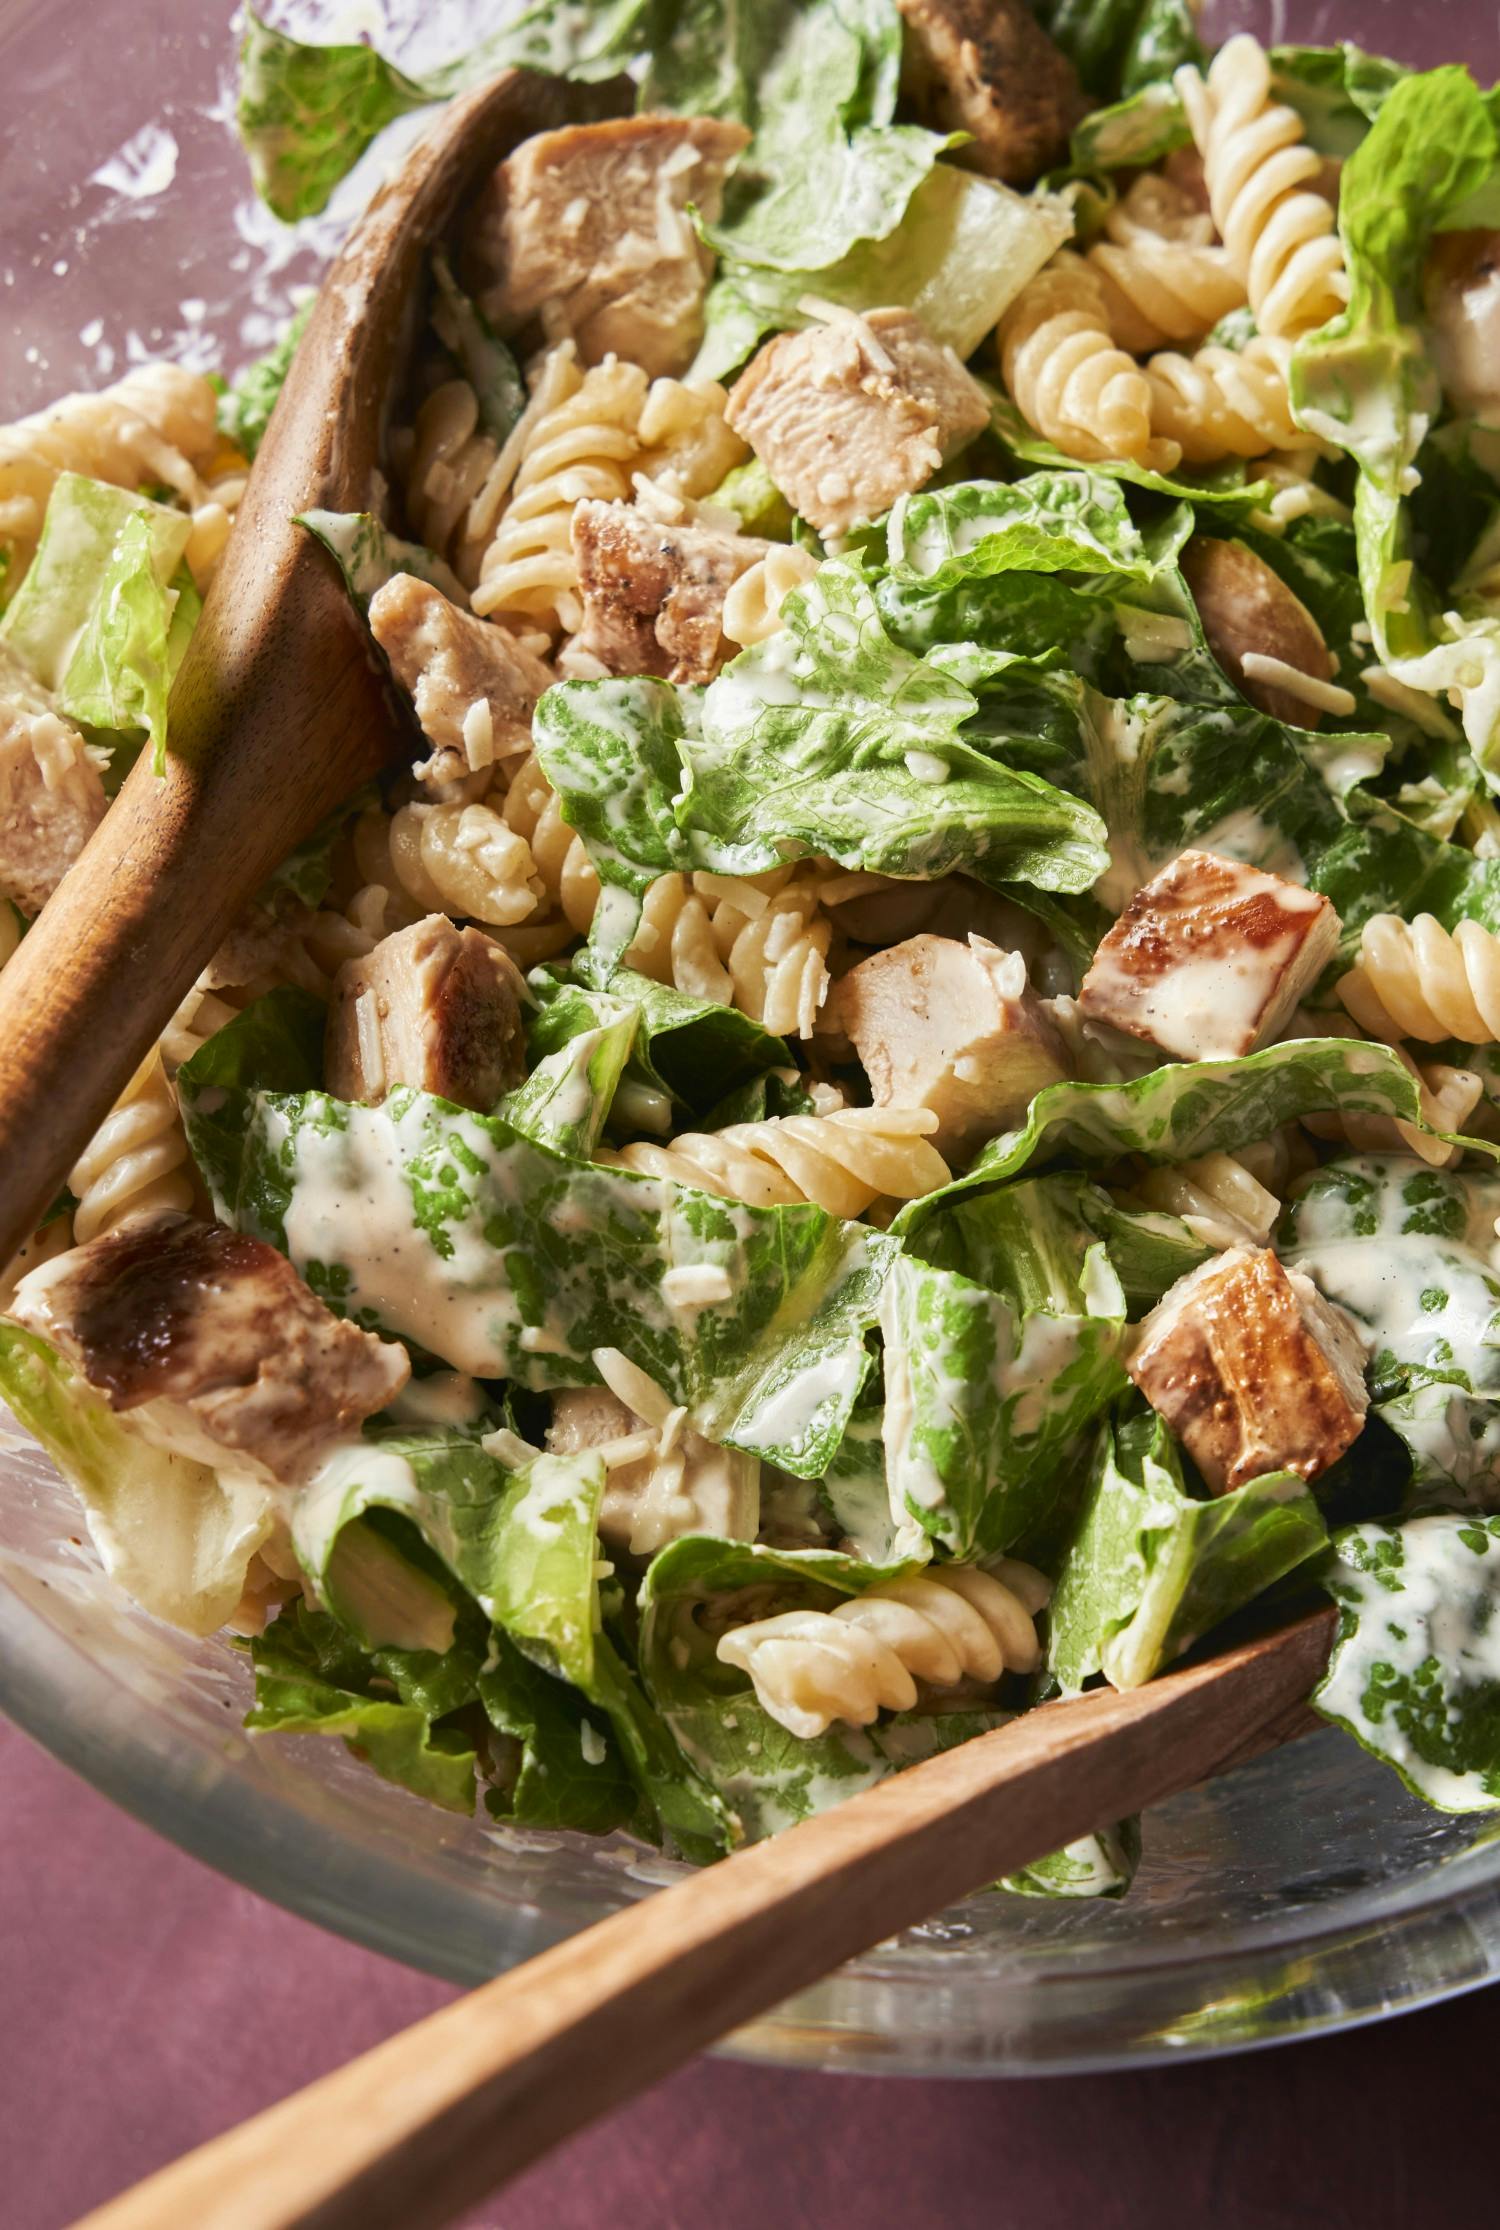 a pasta salad with chicken, romaine lettuce and casesar dressing.